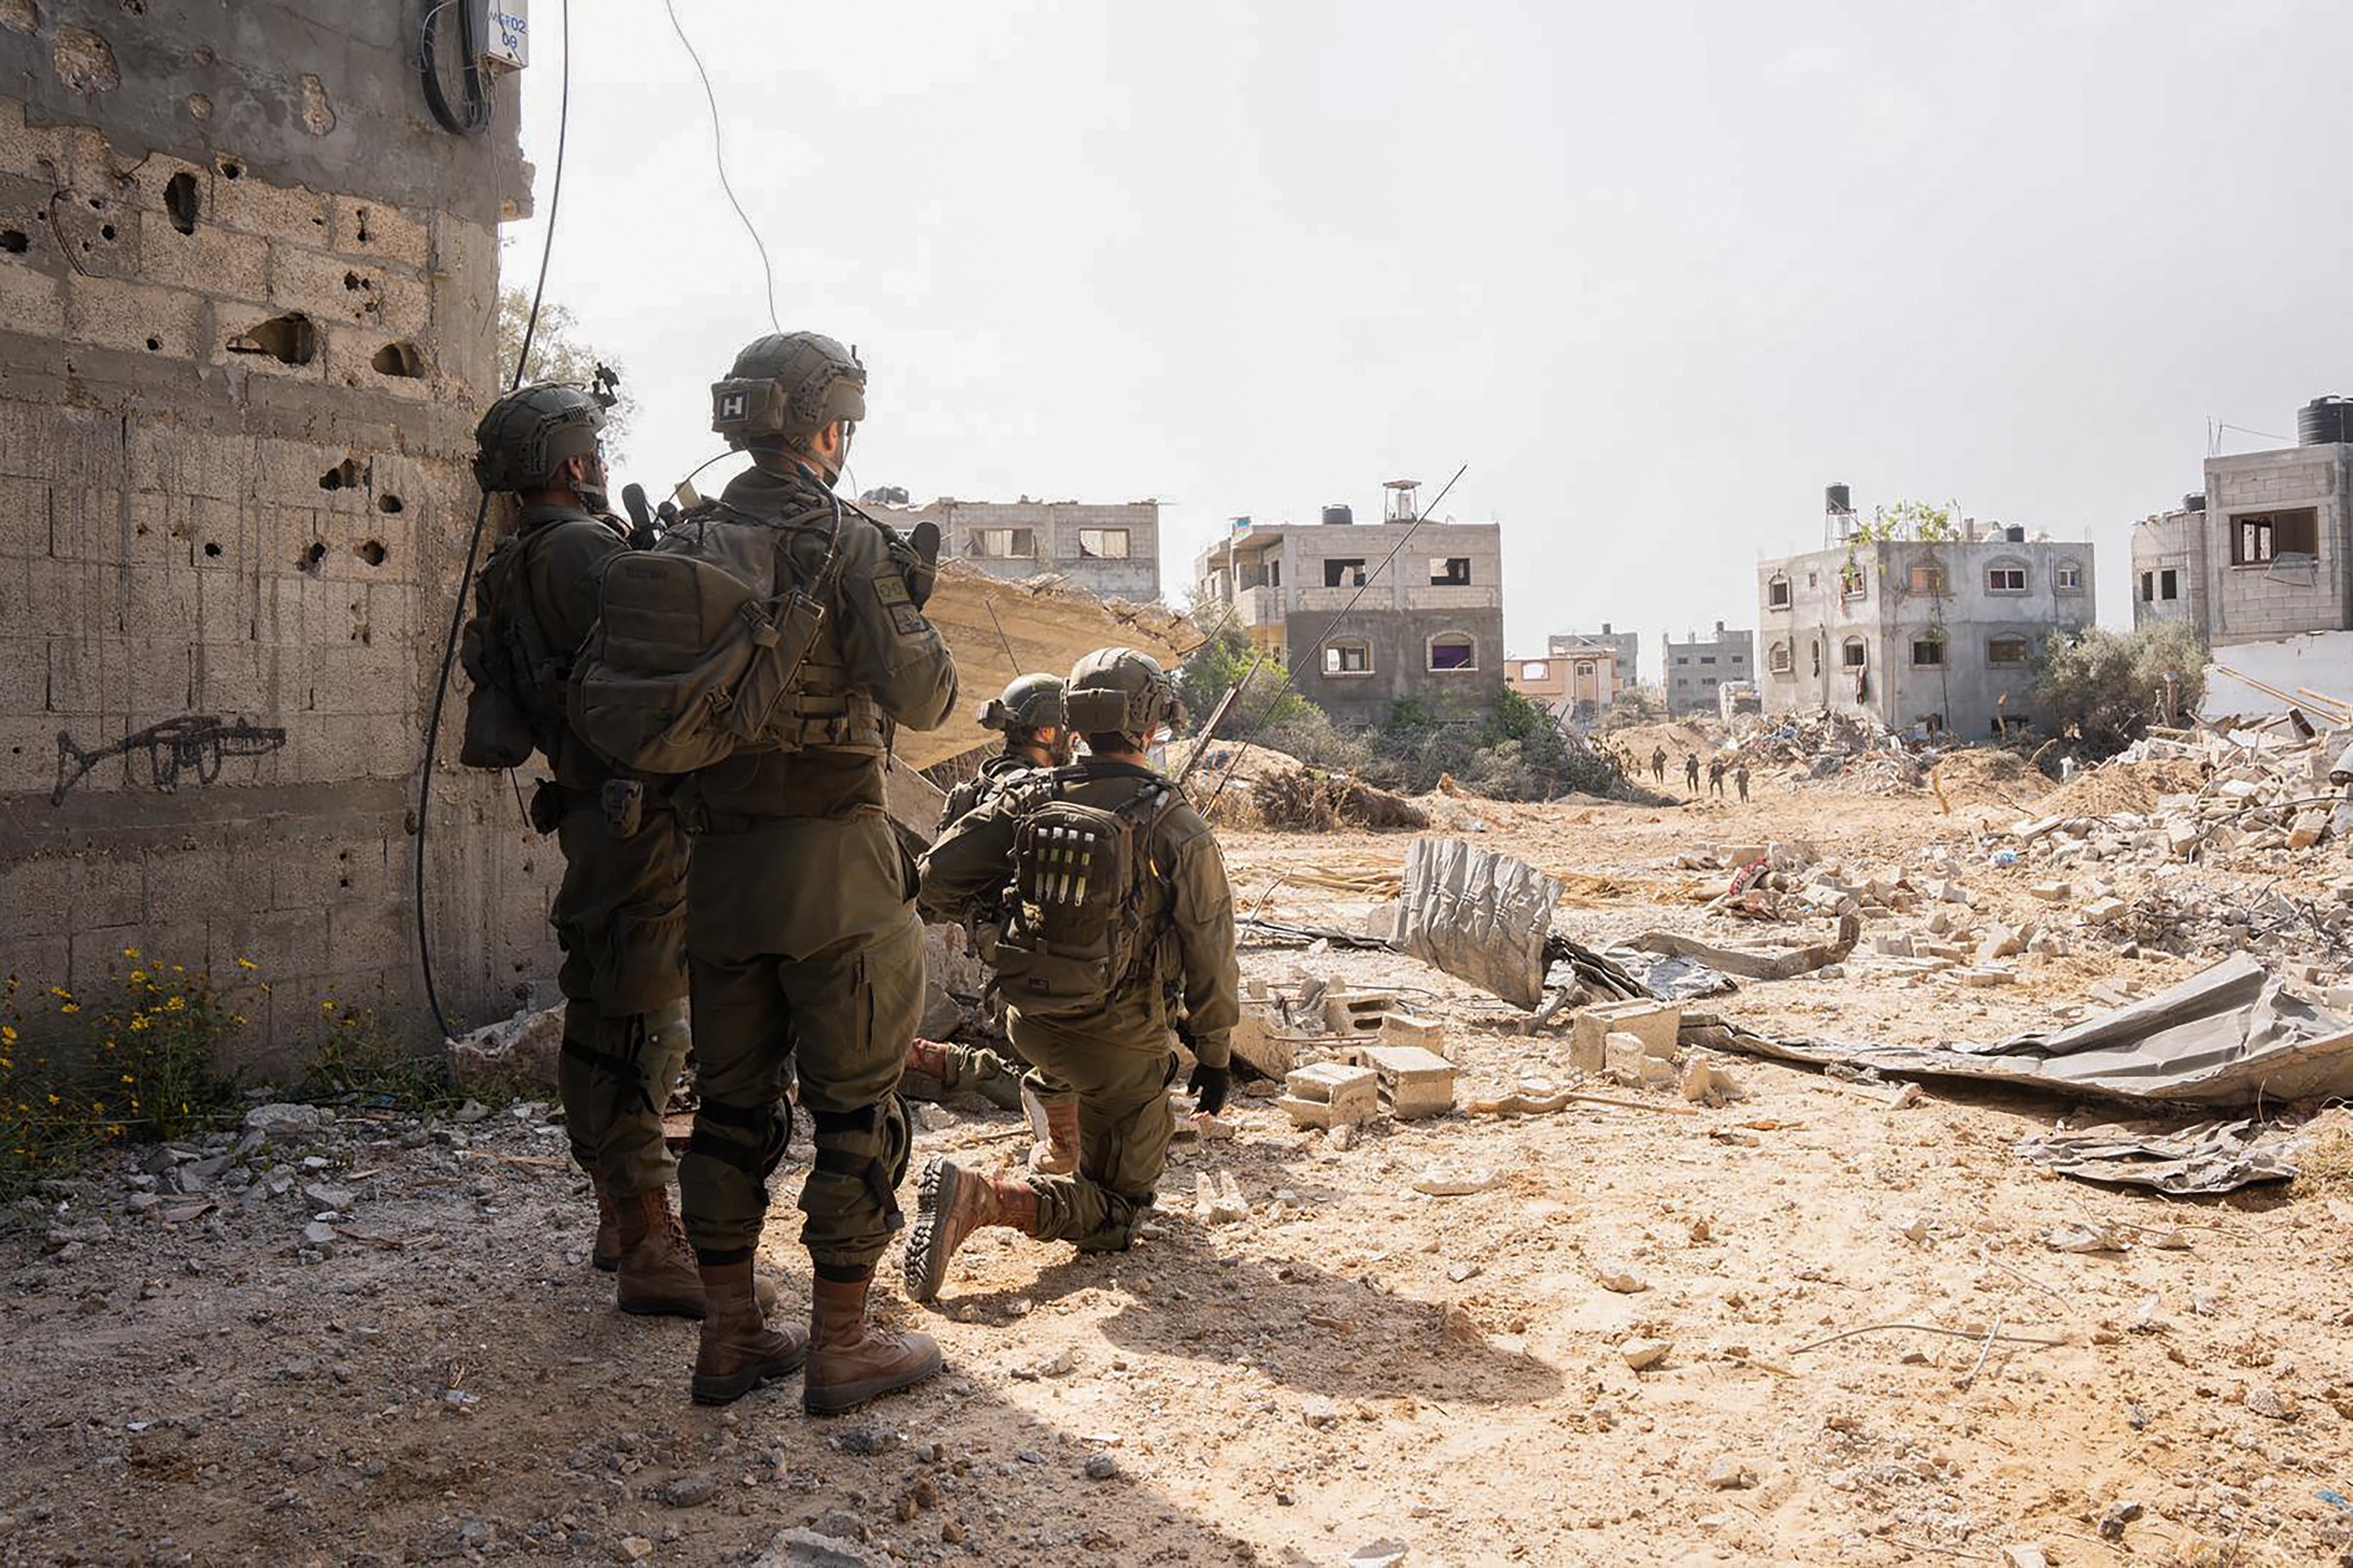 Israeli soldiers operating in the Gaza Strip amid continuing battles between Israel and the Palestinian militant group Hamas